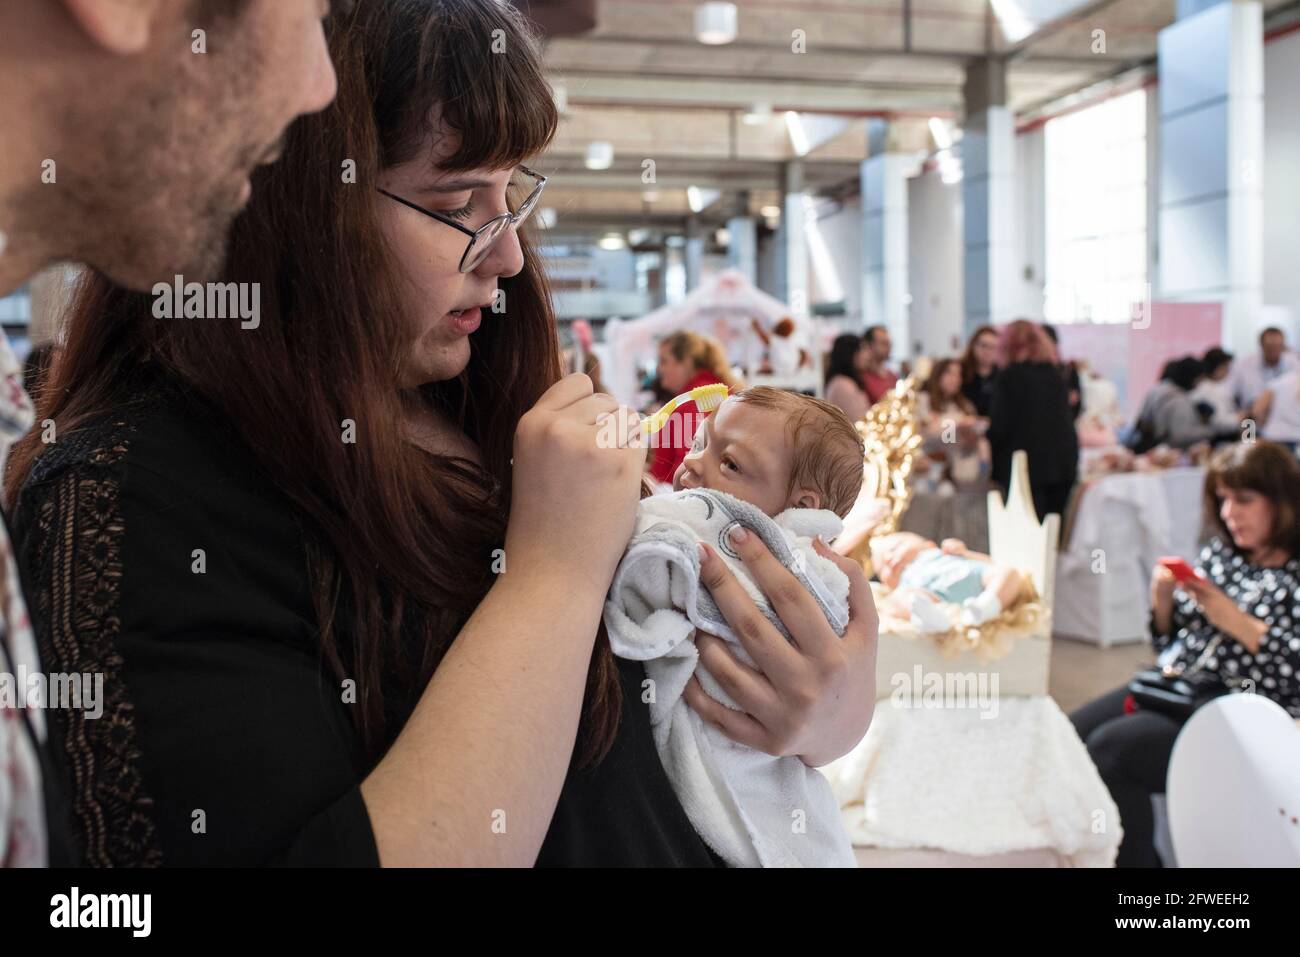 SPAIN, VALENCIA, 2019-04-28. An exhibitor covers her reborn hair with a toothbrush. Mohair goat hair implants accentuate the realism but make the baby Stock Photo